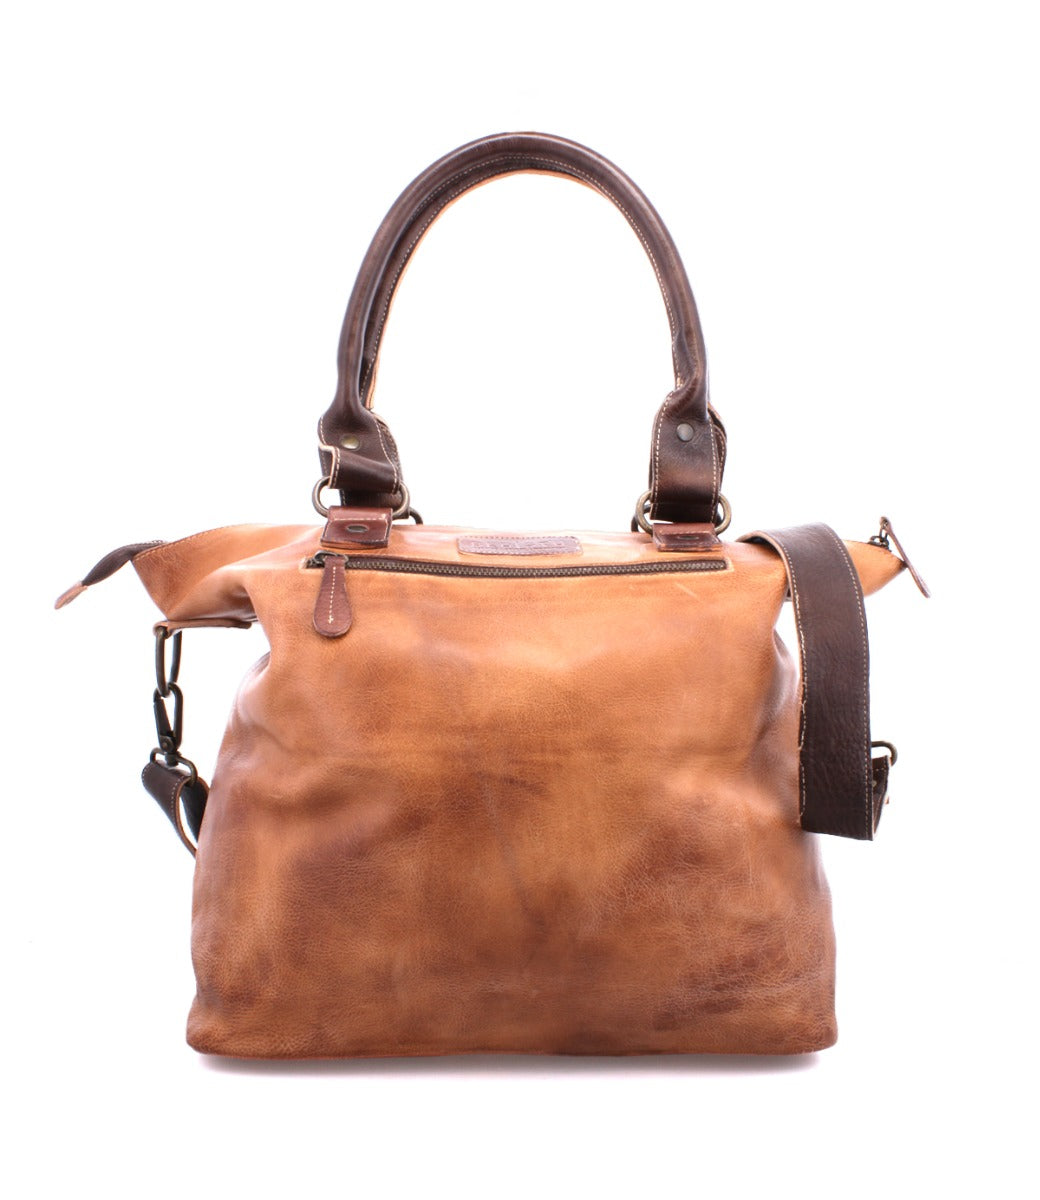 A Big Fork leather handbag with two handles and a shoulder strap by Bed Stu.